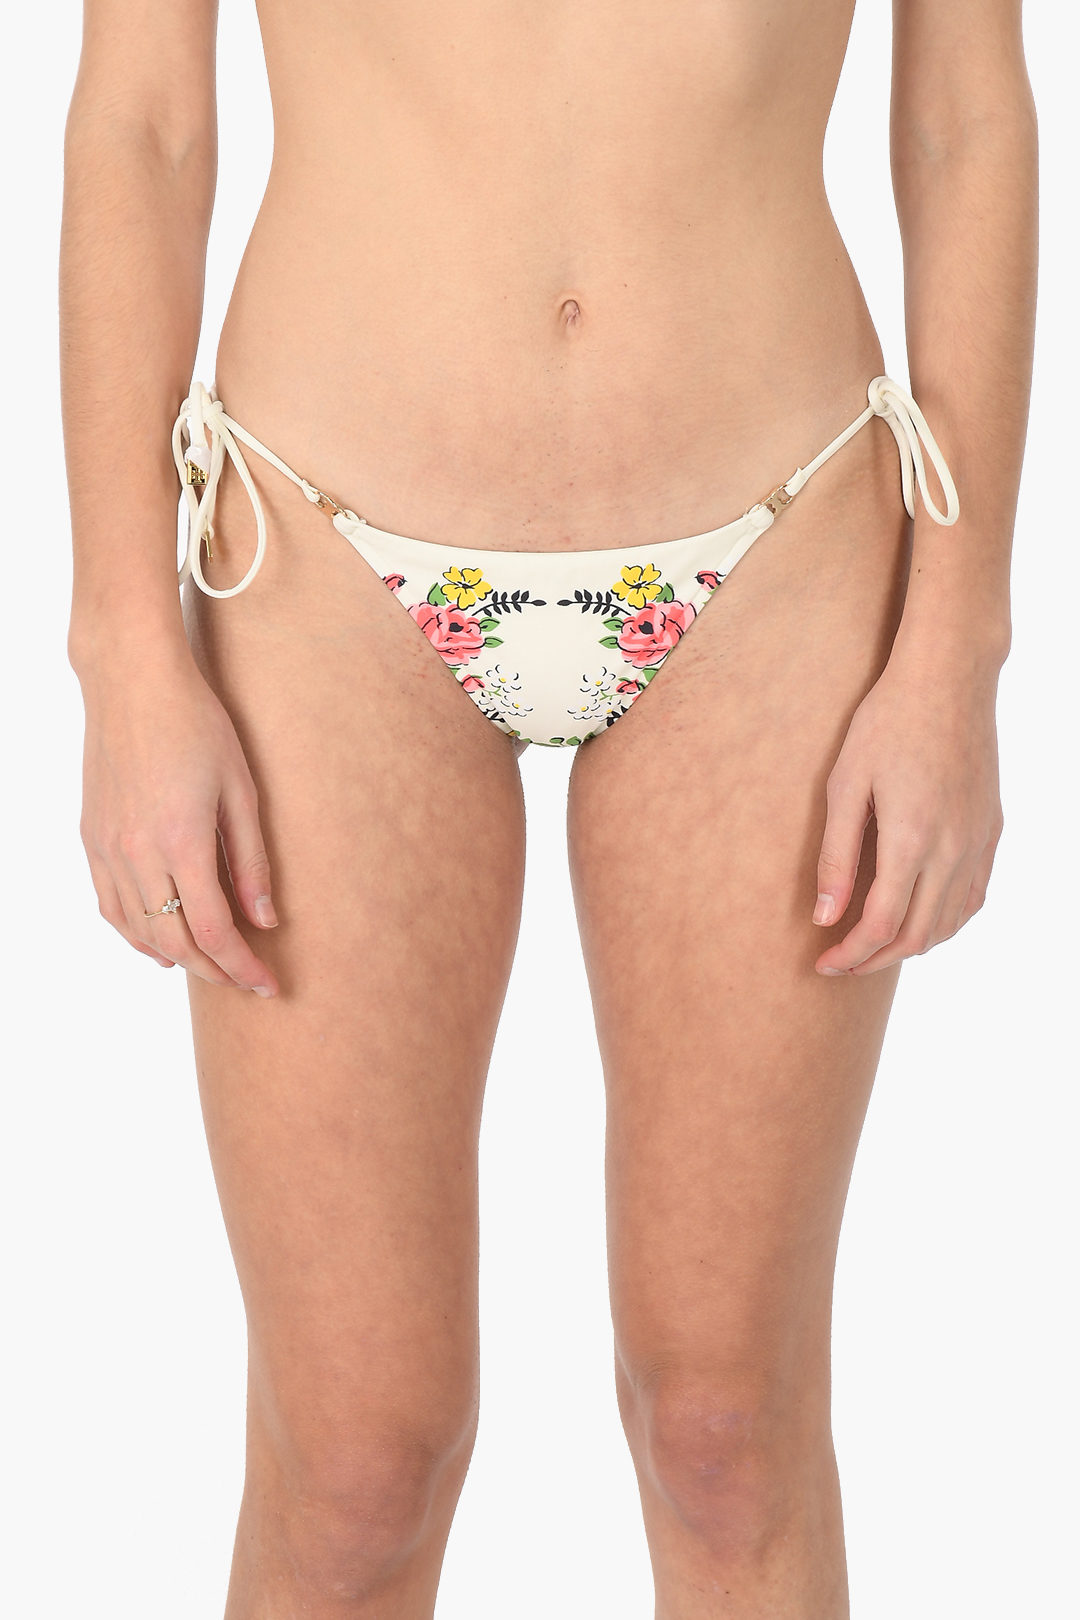 Tory Burch Floral printed GARDEN VEIL Bikini bottom with String Ties women  - Glamood Outlet